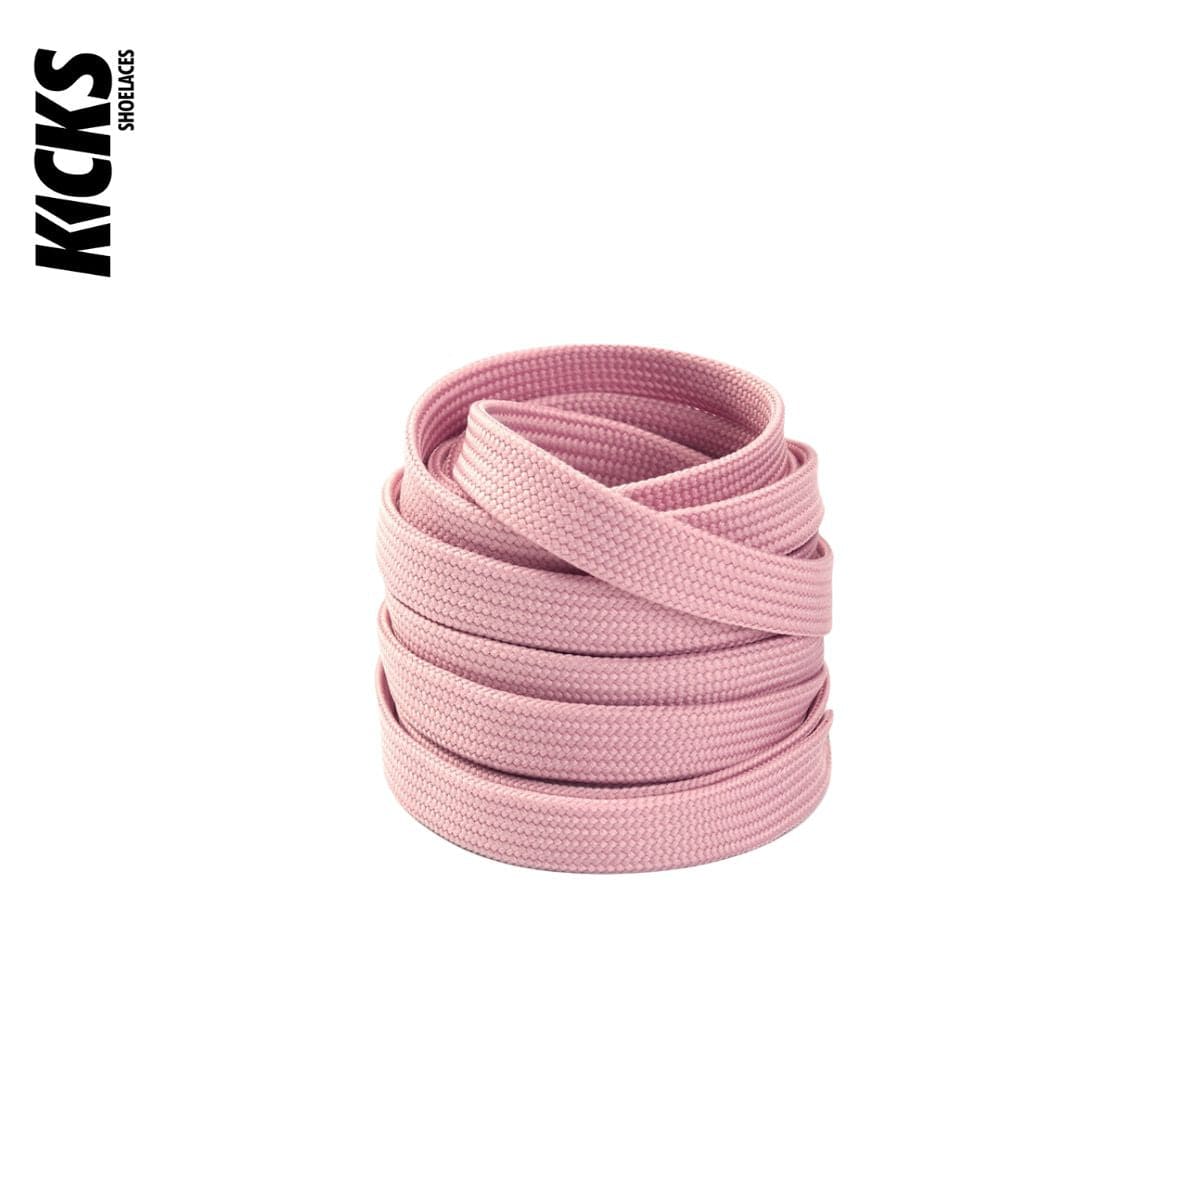 Blush Replacement Laces for Adidas EQT Sneakers by Kicks Shoelaces